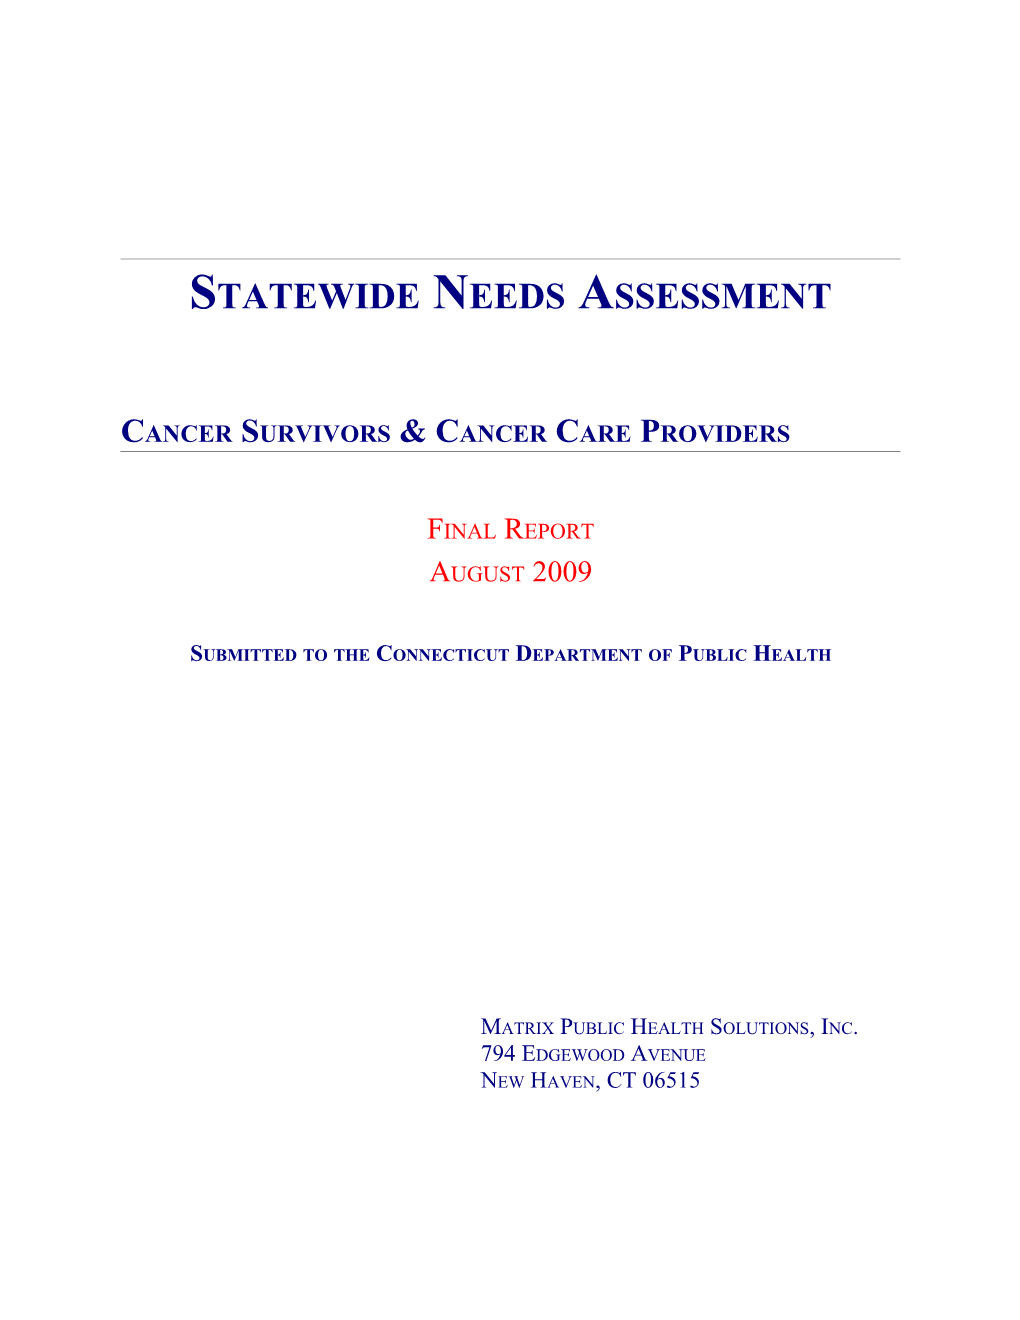 Statewide Needs Assessment